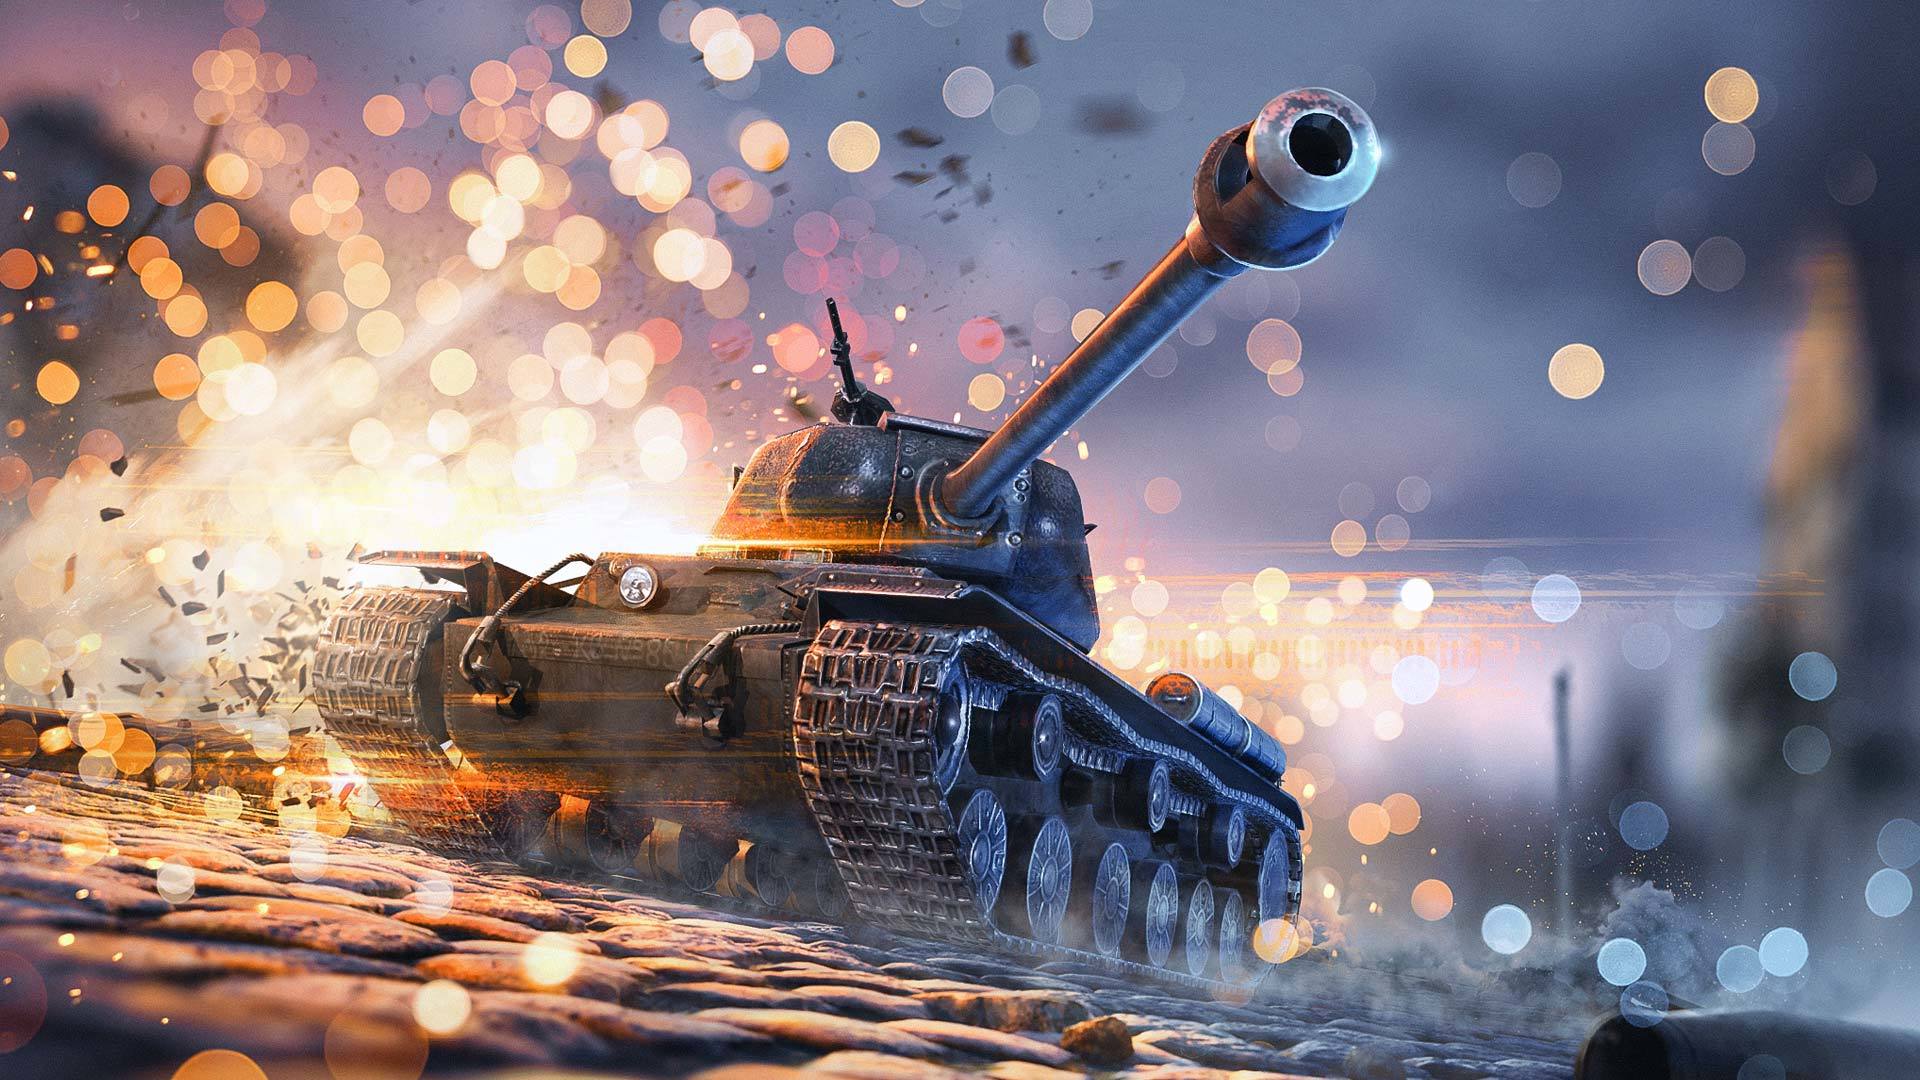 world of tanks blitz how to get gold